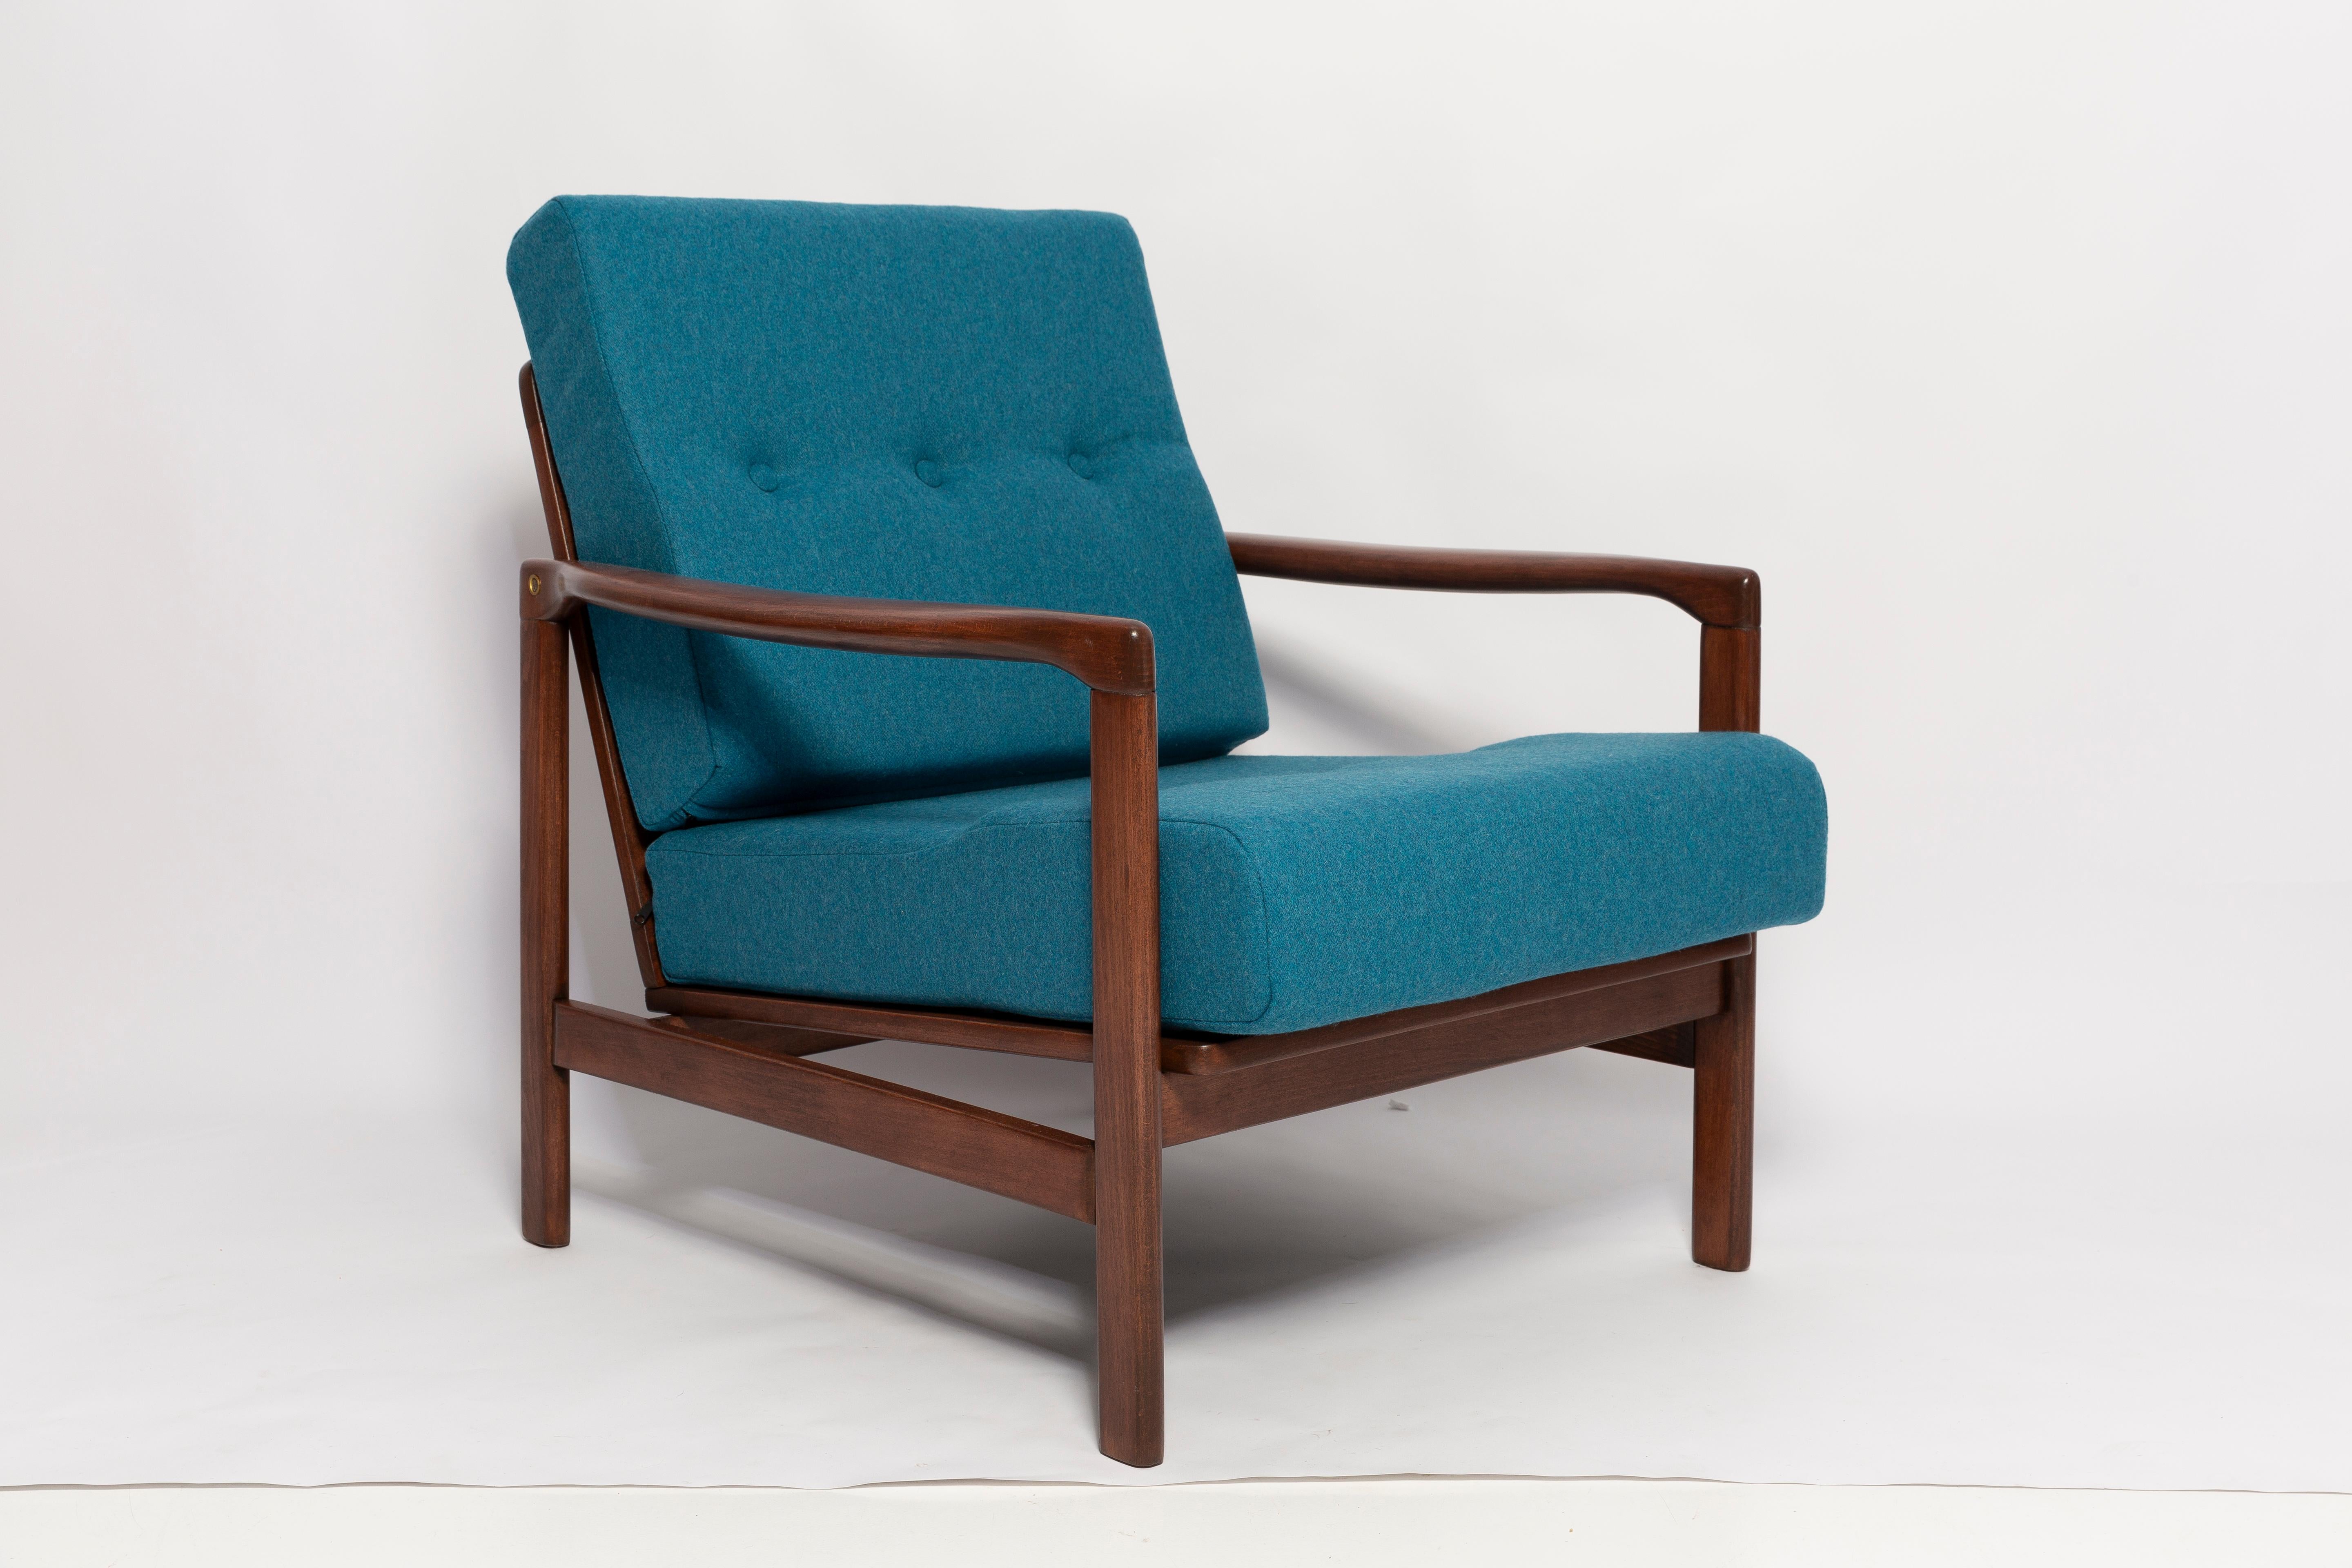 The B-7522 armchairs was designed in the 1960s by Zenon Baczyk, it was produced by Swarzedz furniture factories in Poland. This is original vintage armchair after renovation, they are not new! 

Furniture kept in perfect condition, after full